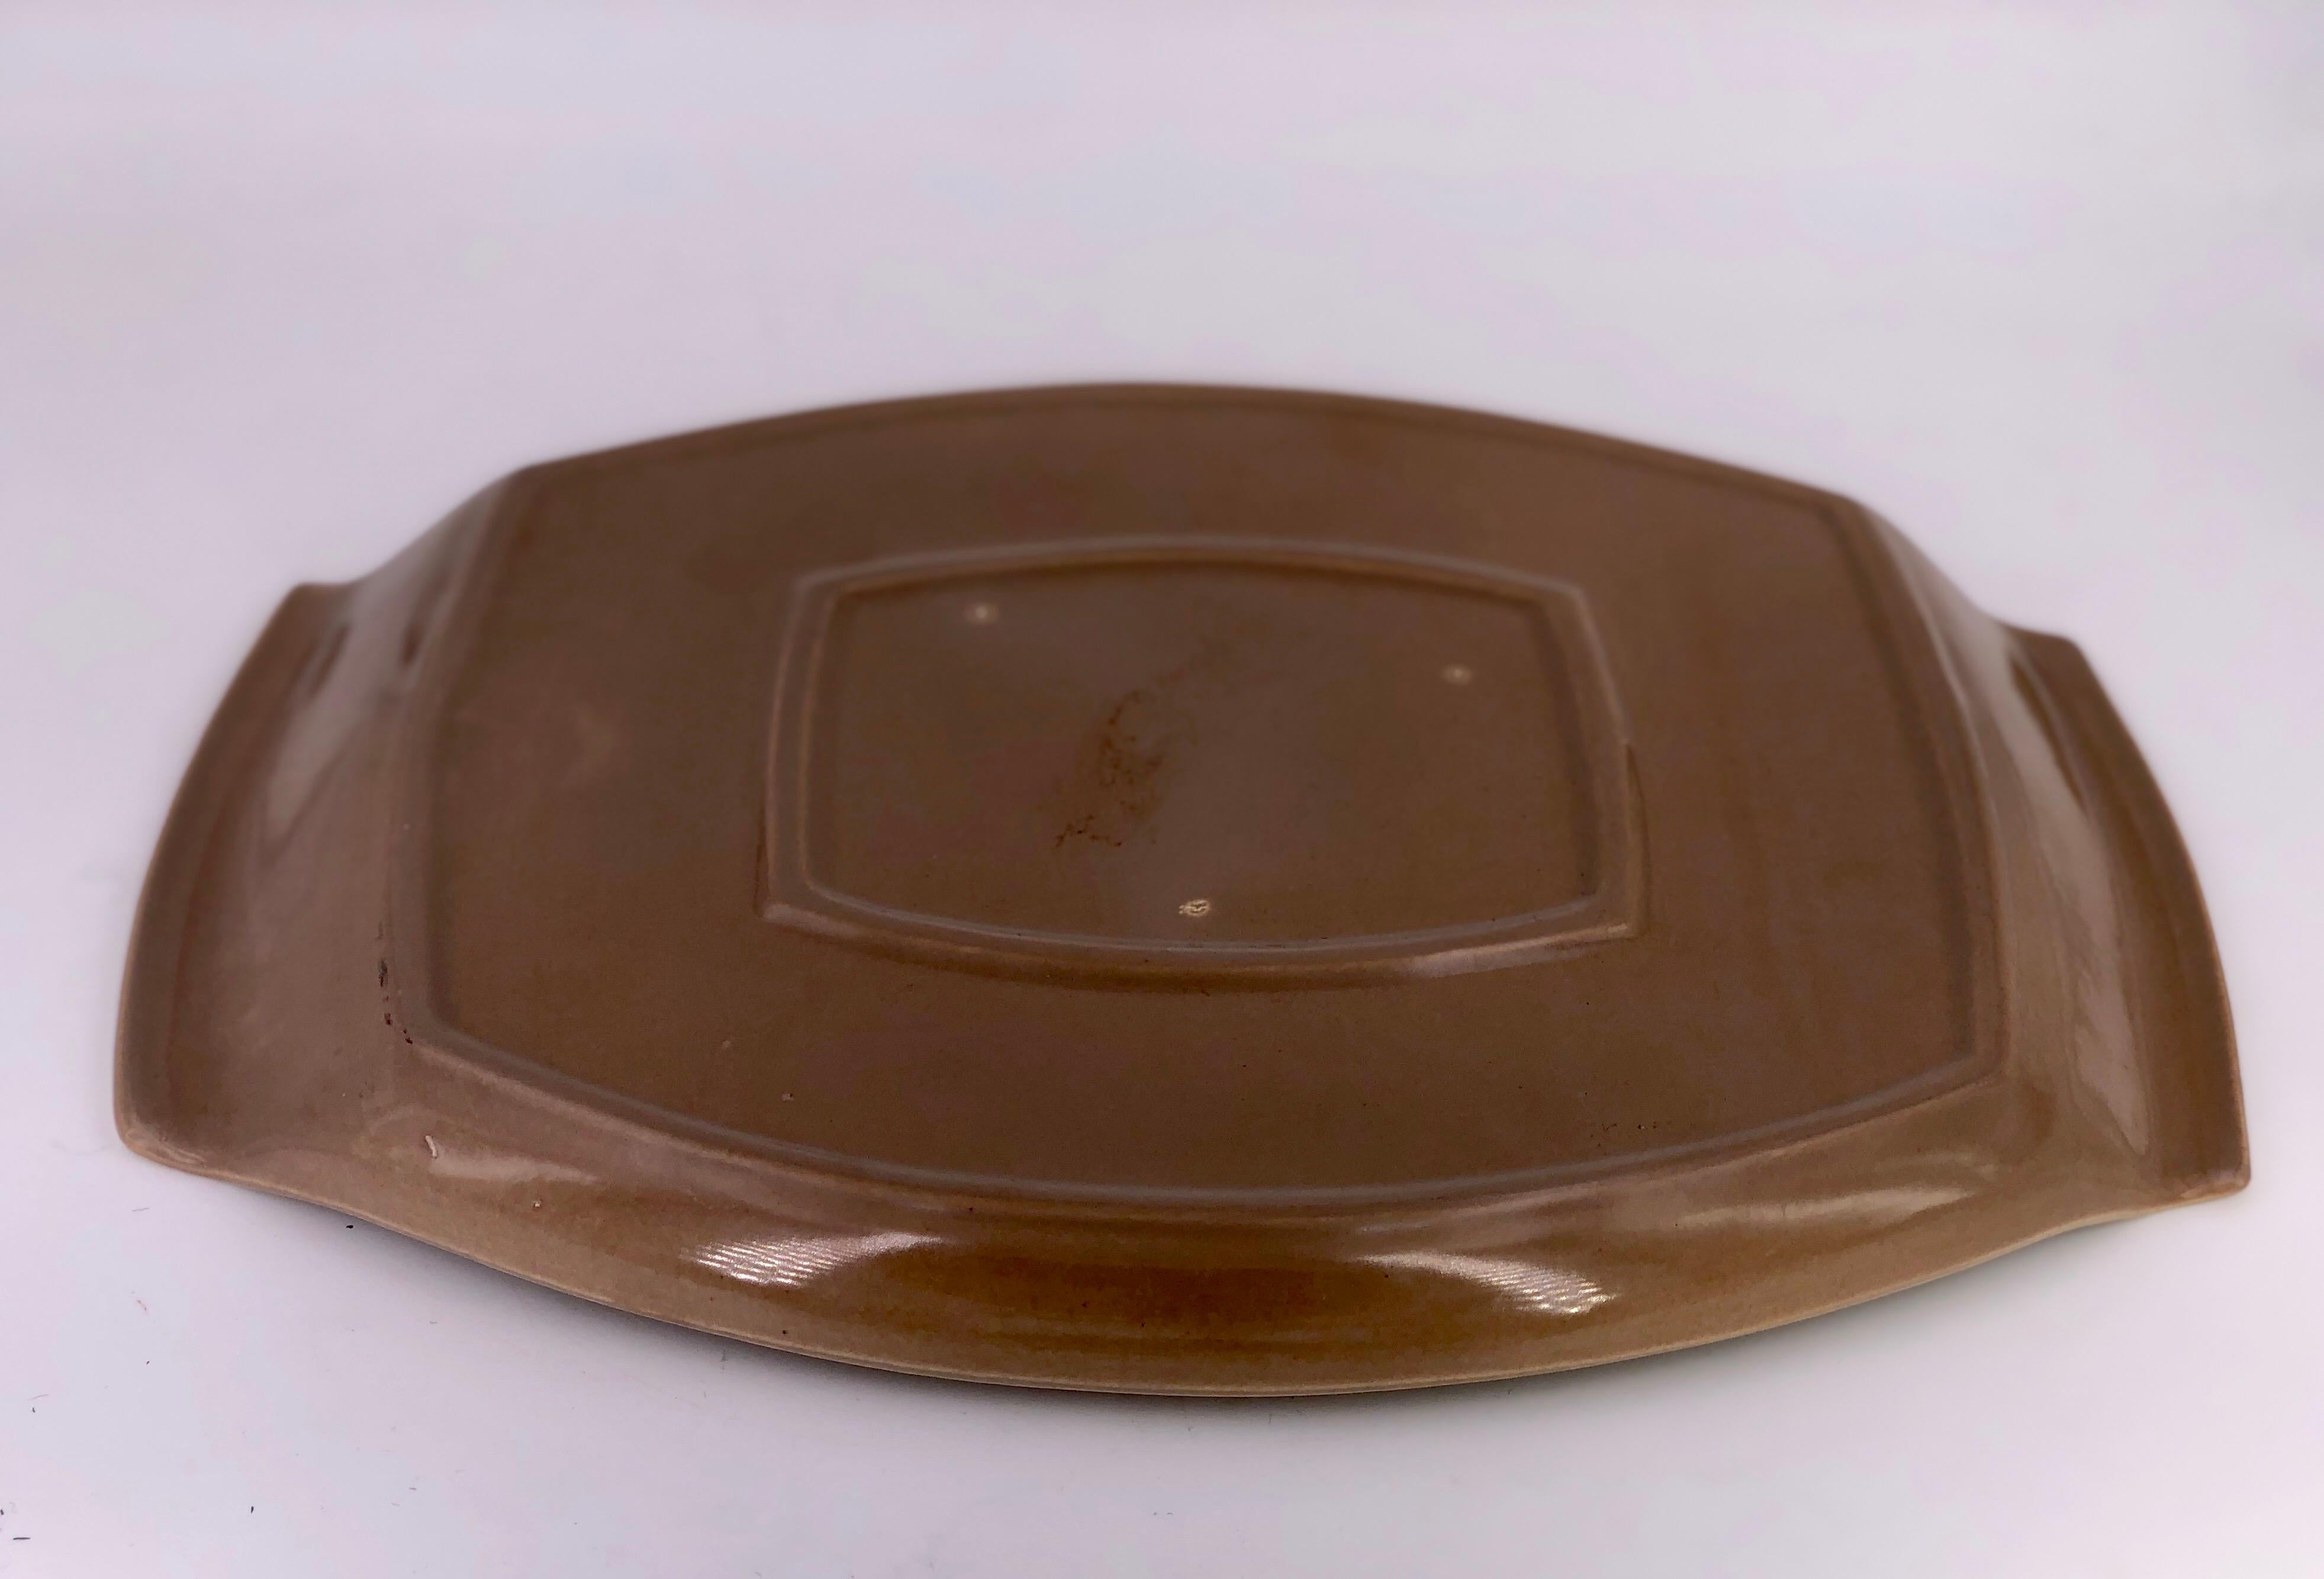 A beautiful large oval centerpiece plater with handles designed by Aldo Londi for Red Wing Pottery. Classic midcentury design.